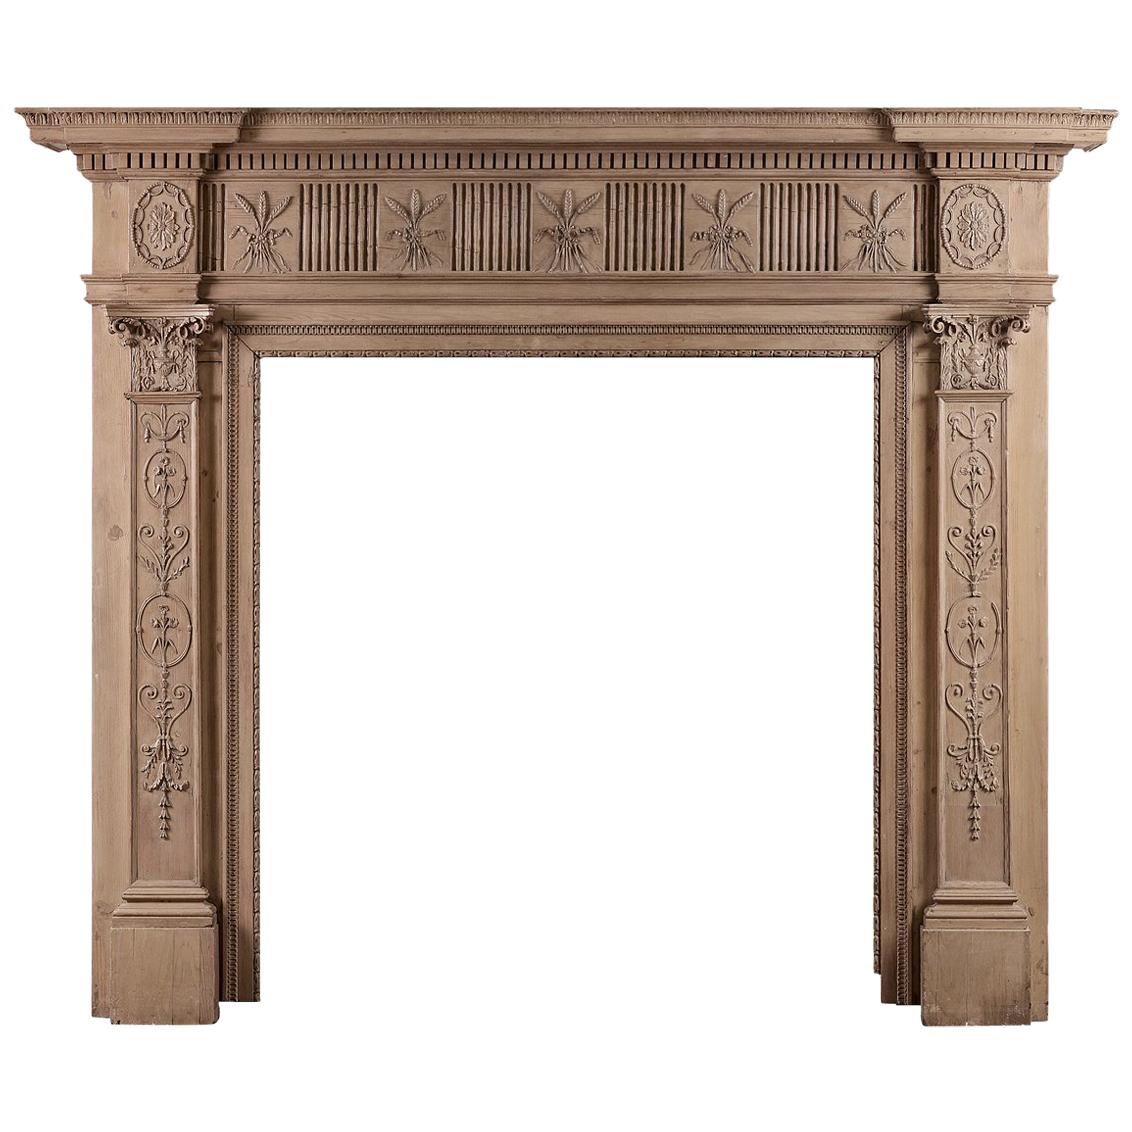 18th Century Carved Pine Fireplace in the Adam Style